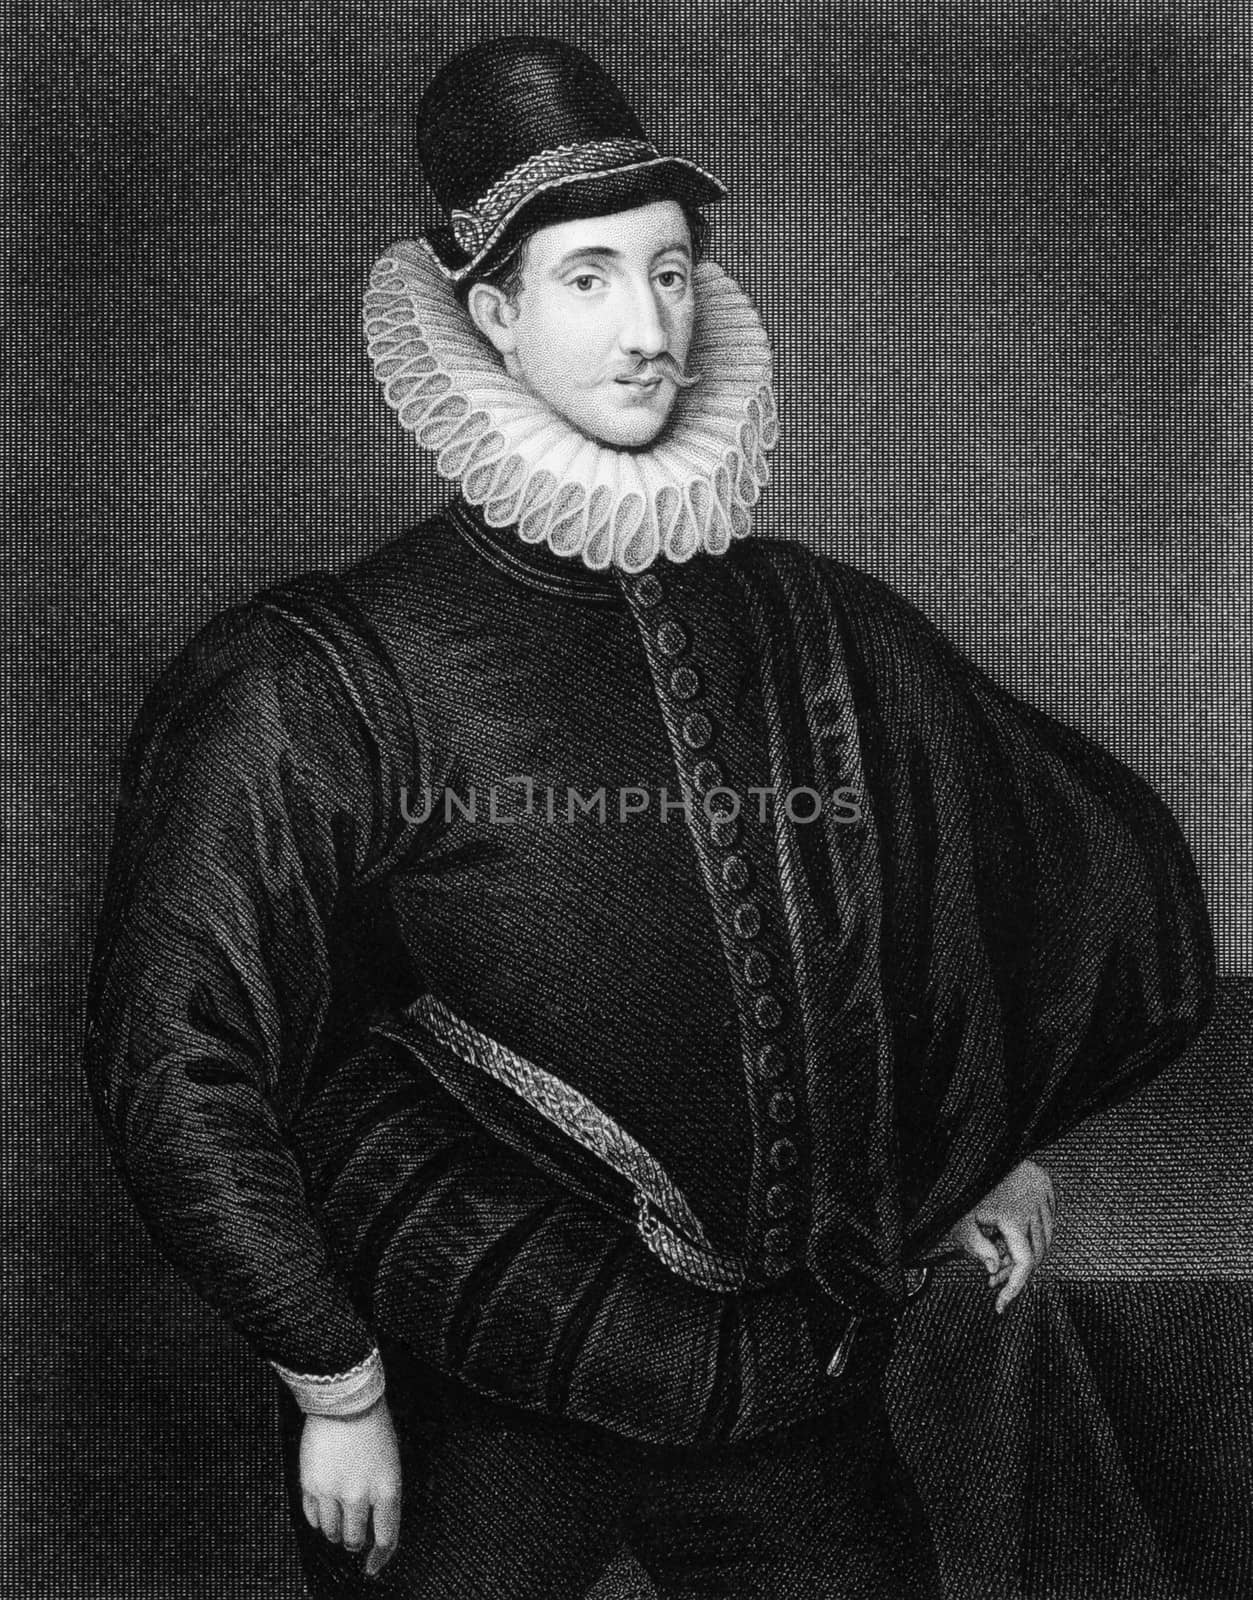 Fulke Greville, 1st Baron Brooke (1554-1628) on engraving from 1830. Elizabethan poet, dramatist, and statesman. Engraved by J.Cochran and published in ''Portraits of Illustrious Personages of Great Britain'',UK,1830.
